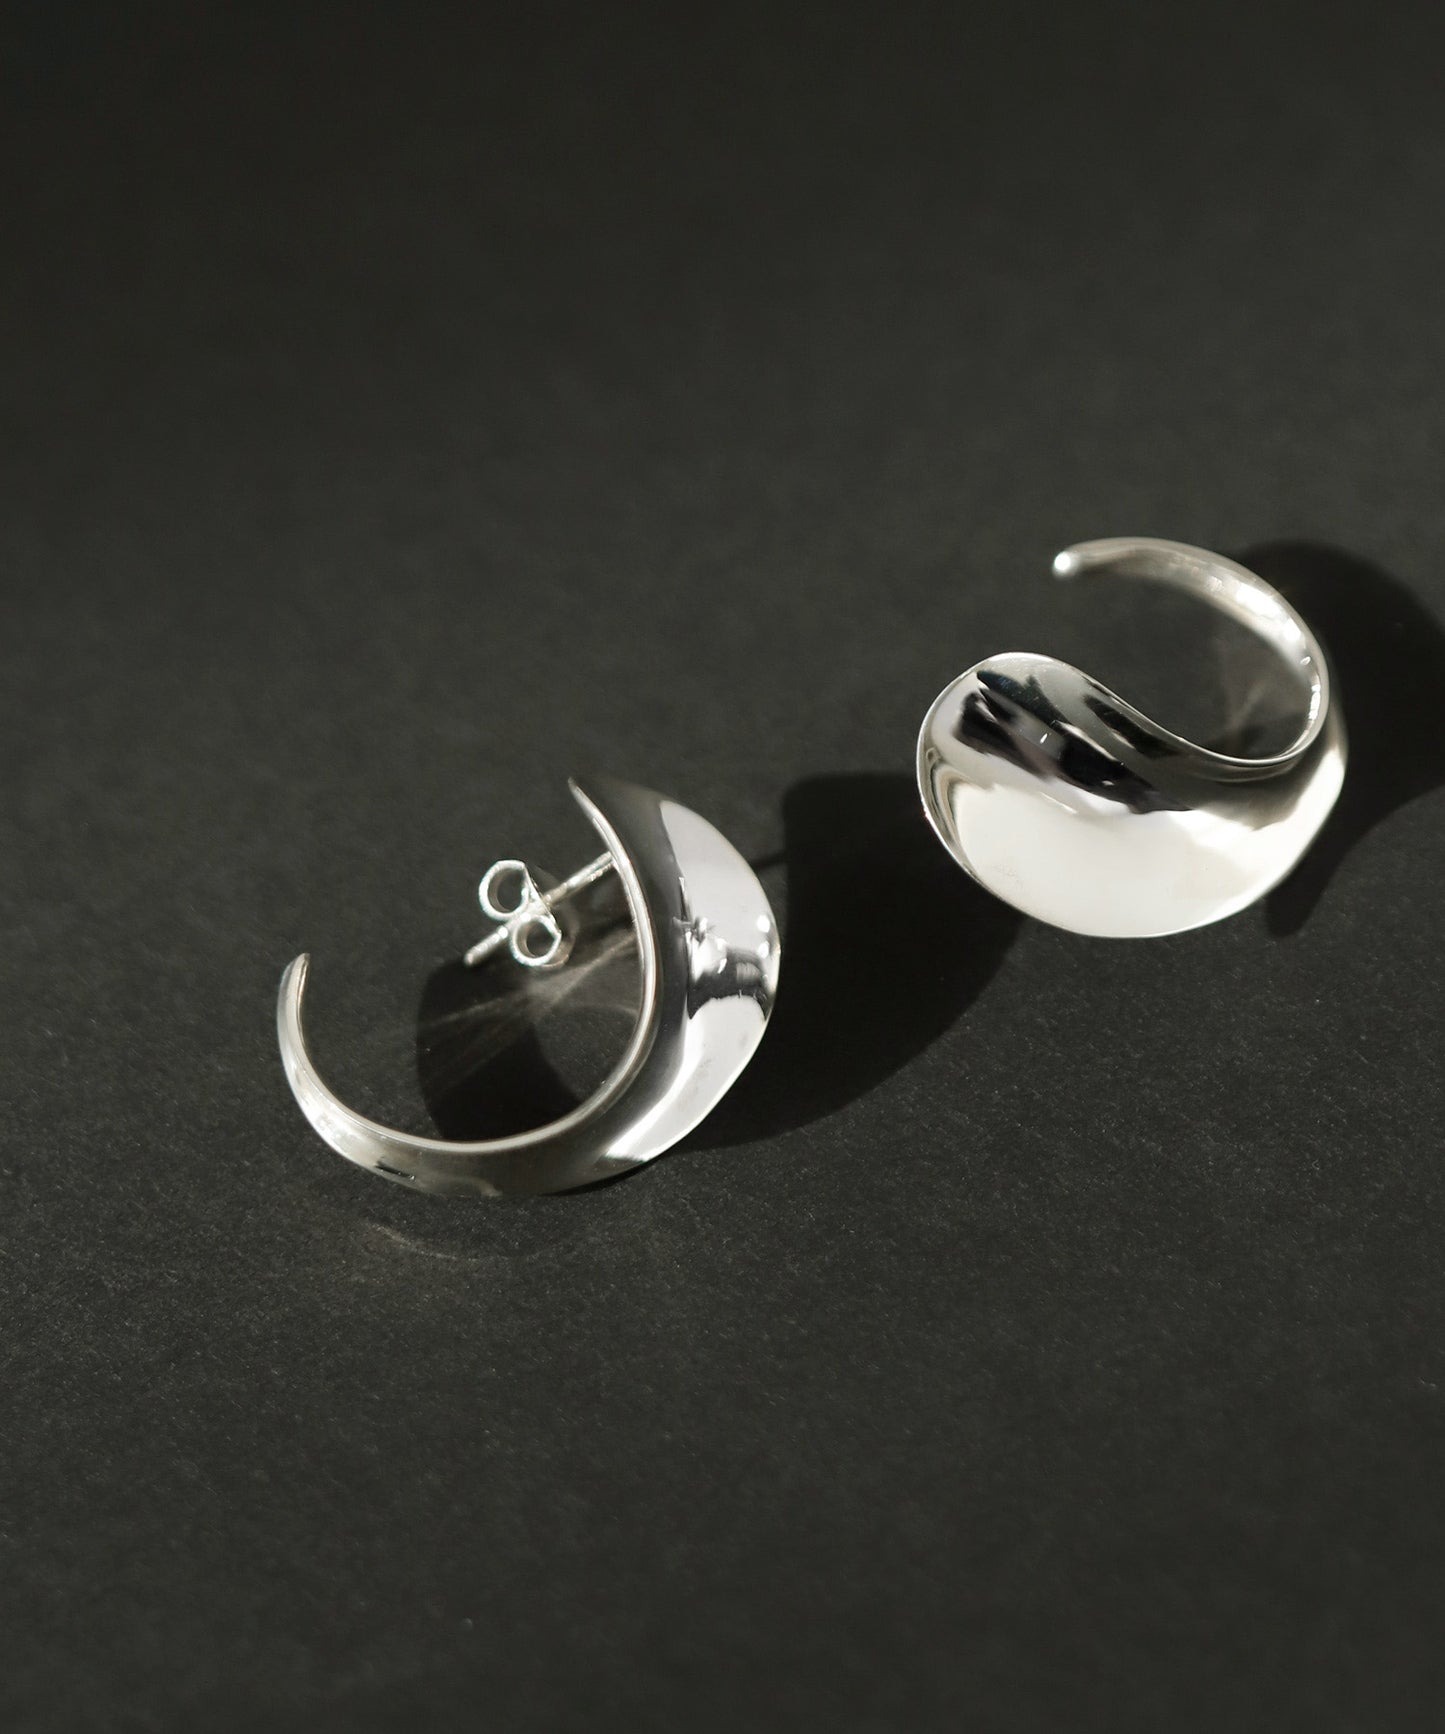 【Eligible for Novelty】Vintage Earrings [925 silver][A]